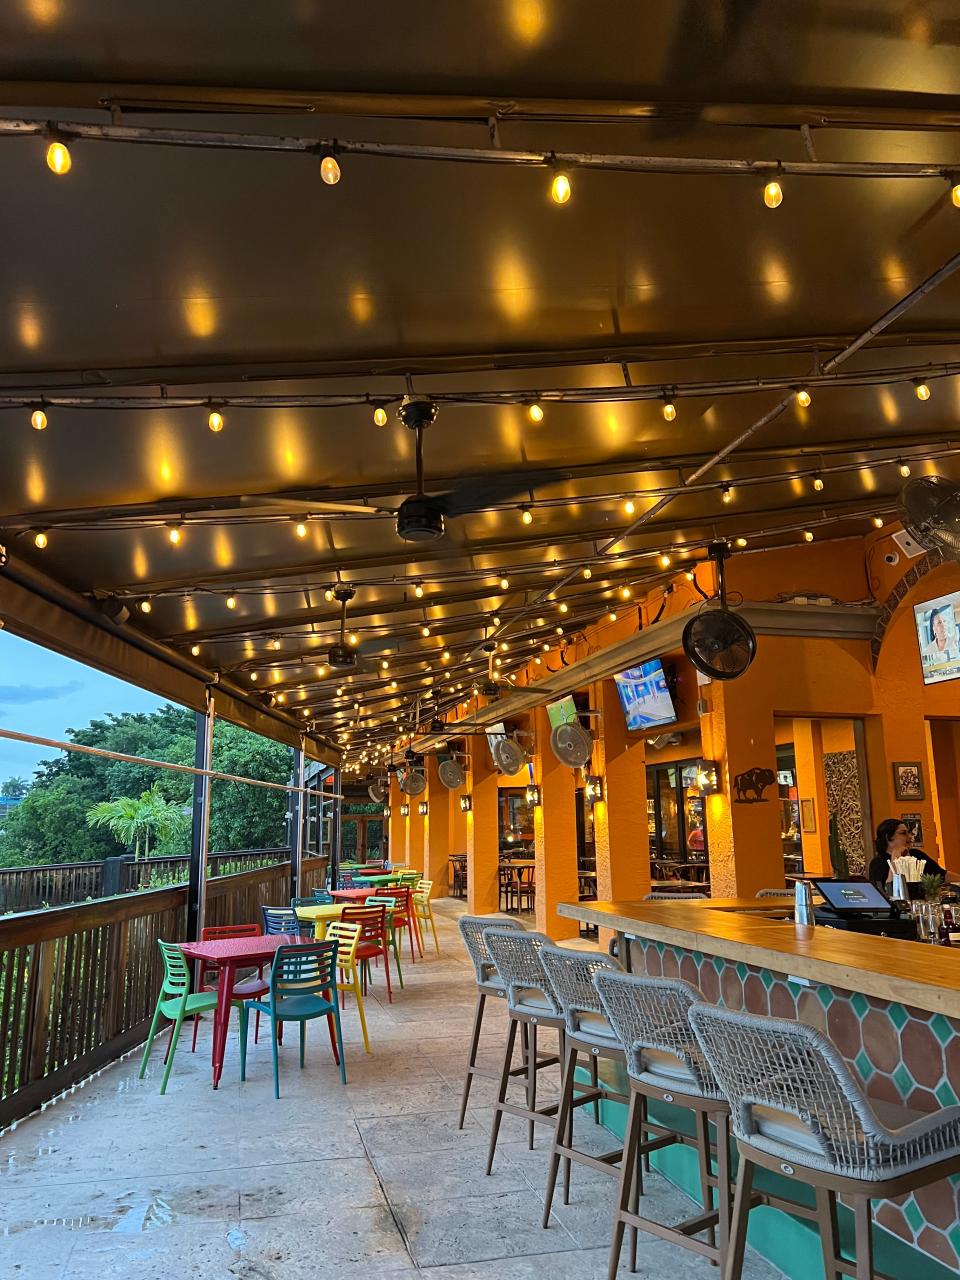 Located directly on the Intracoastal Waterway in Delray Beach, Del Fuego features a large outdoor seating area and 40 televisions for watching sporting events.